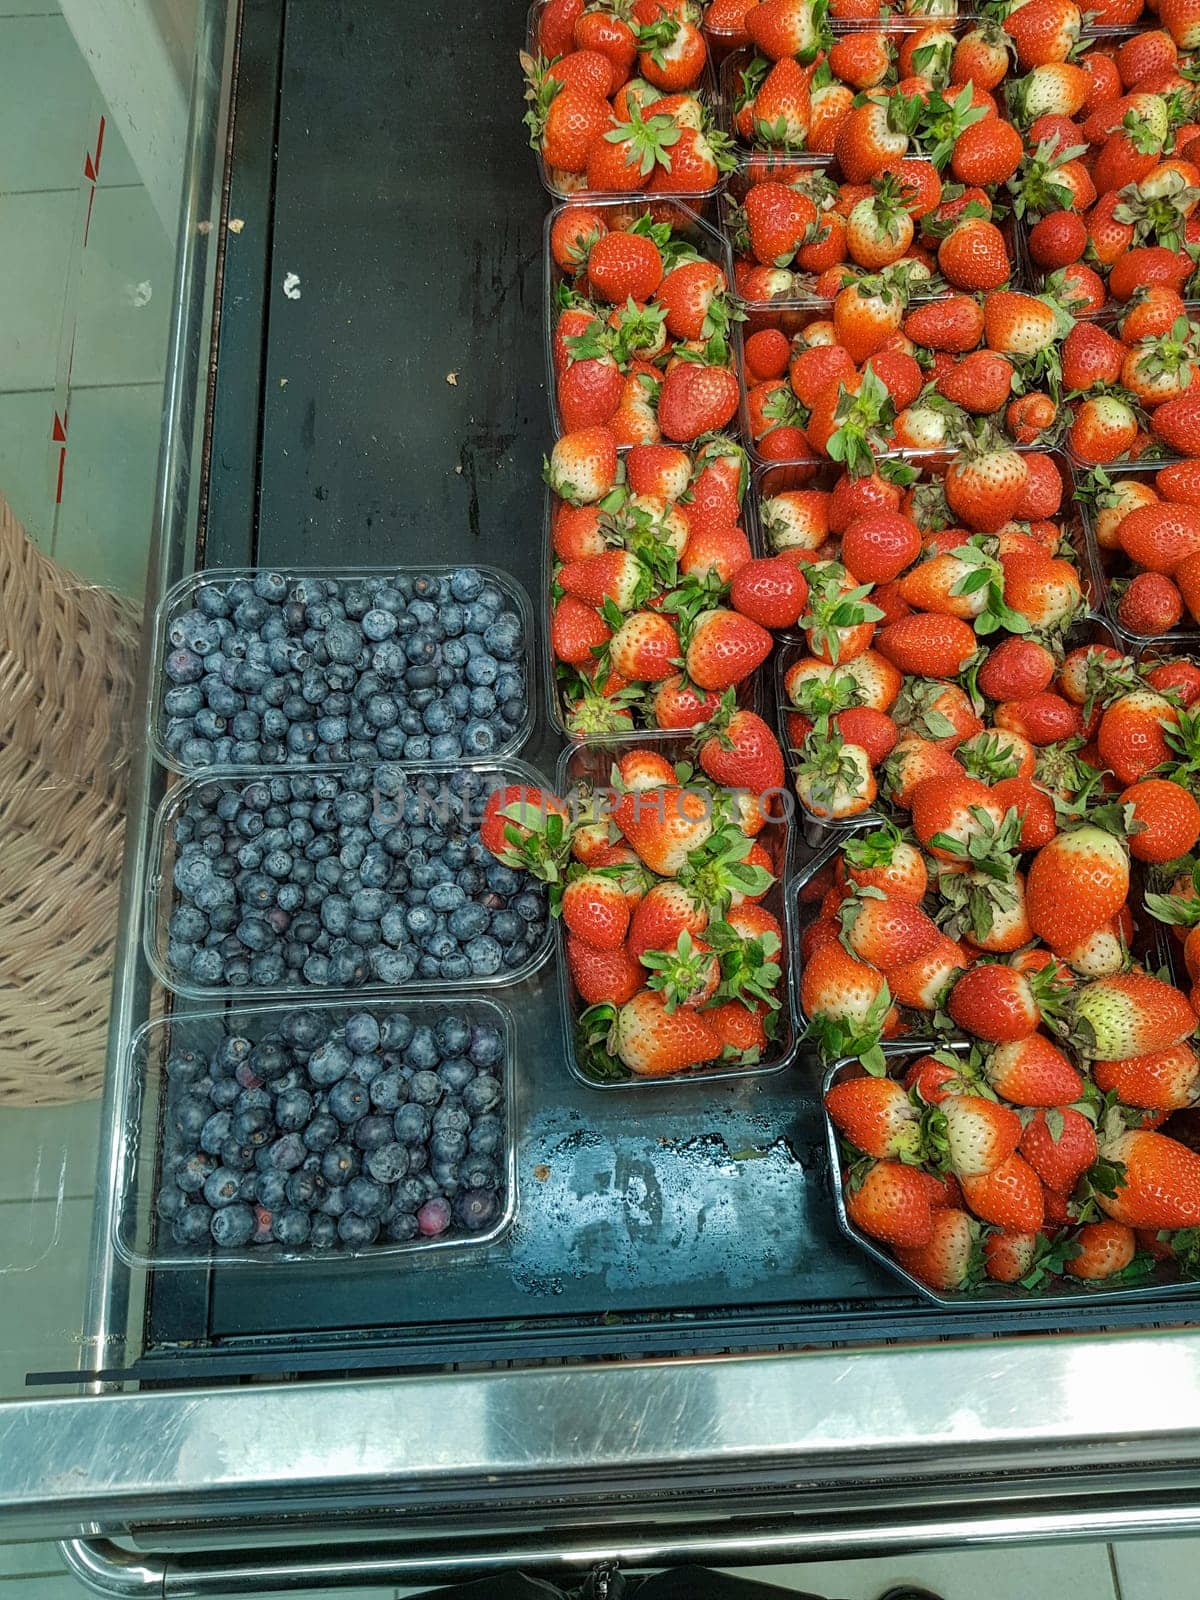 Lots of blueberries and strawberries in containers on the counter in the store, close-up, vertical.